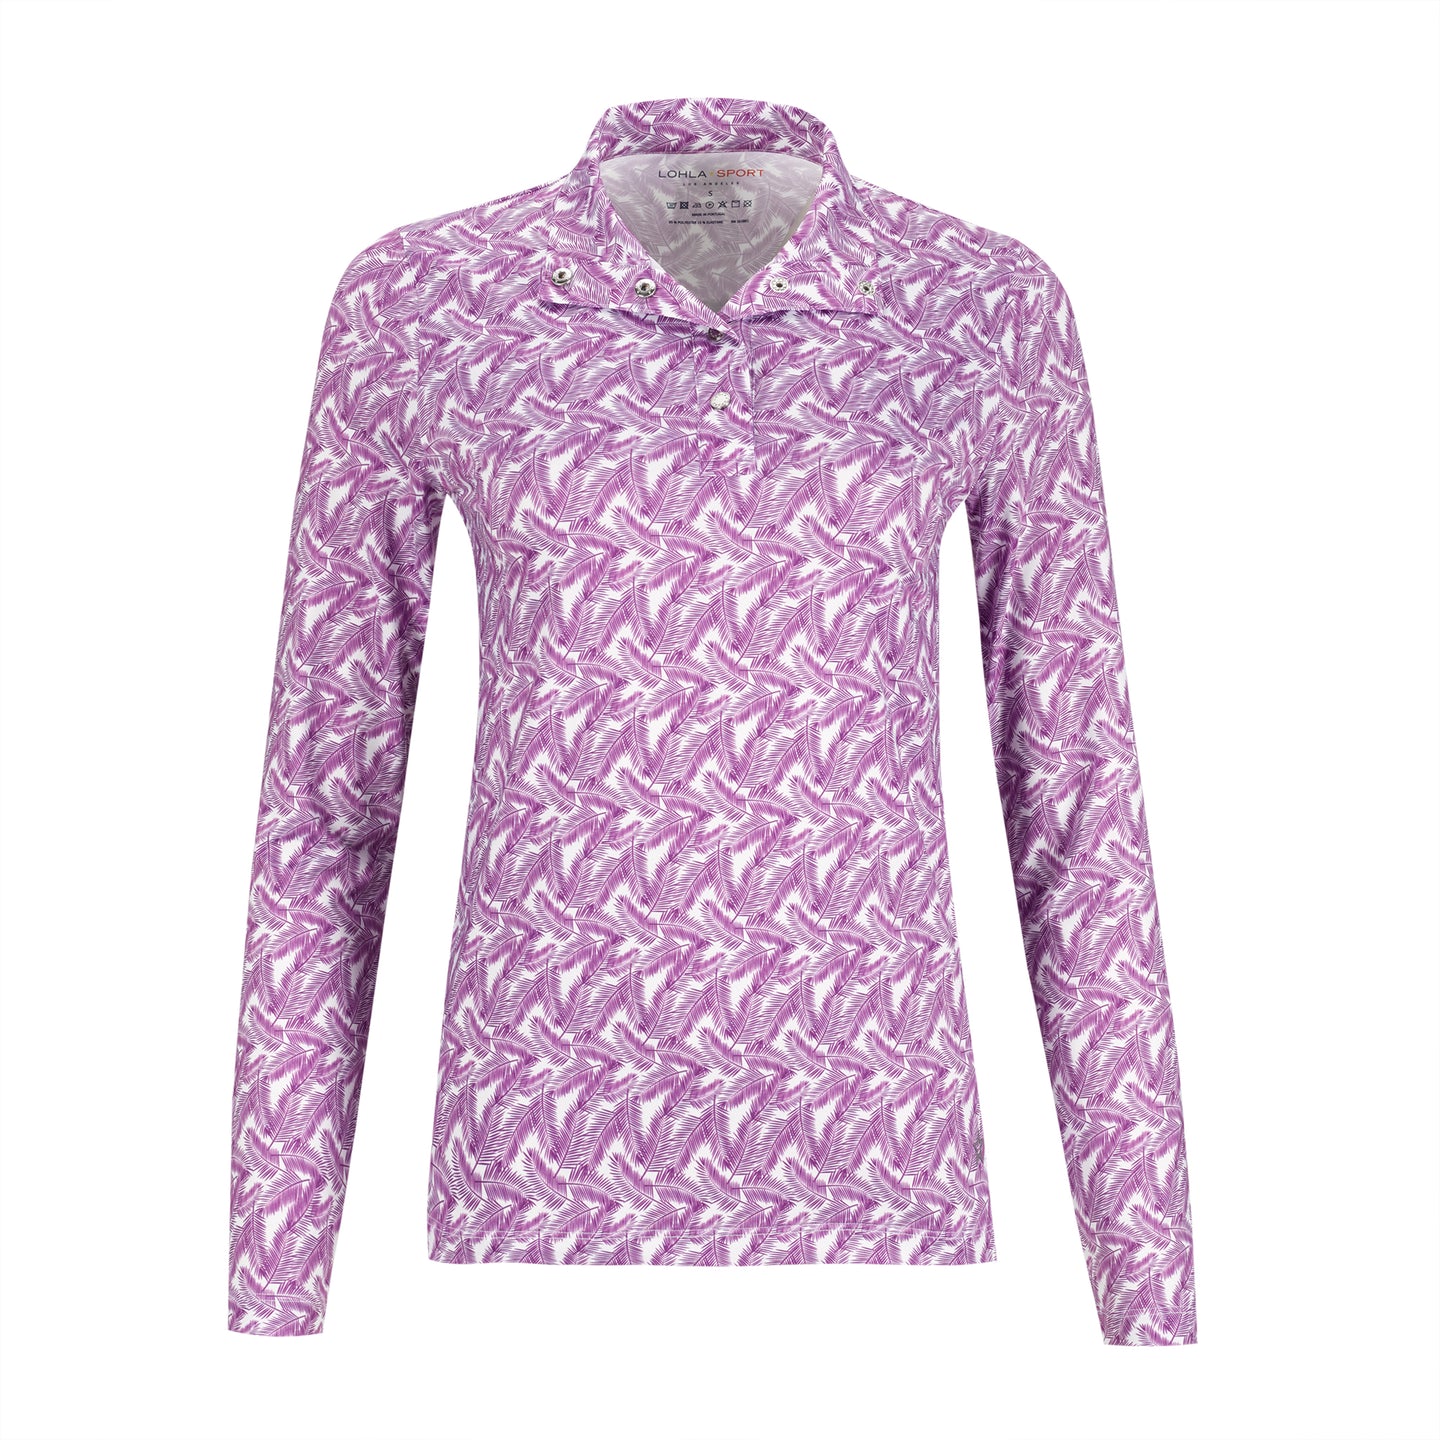 The Doheny Printed Top